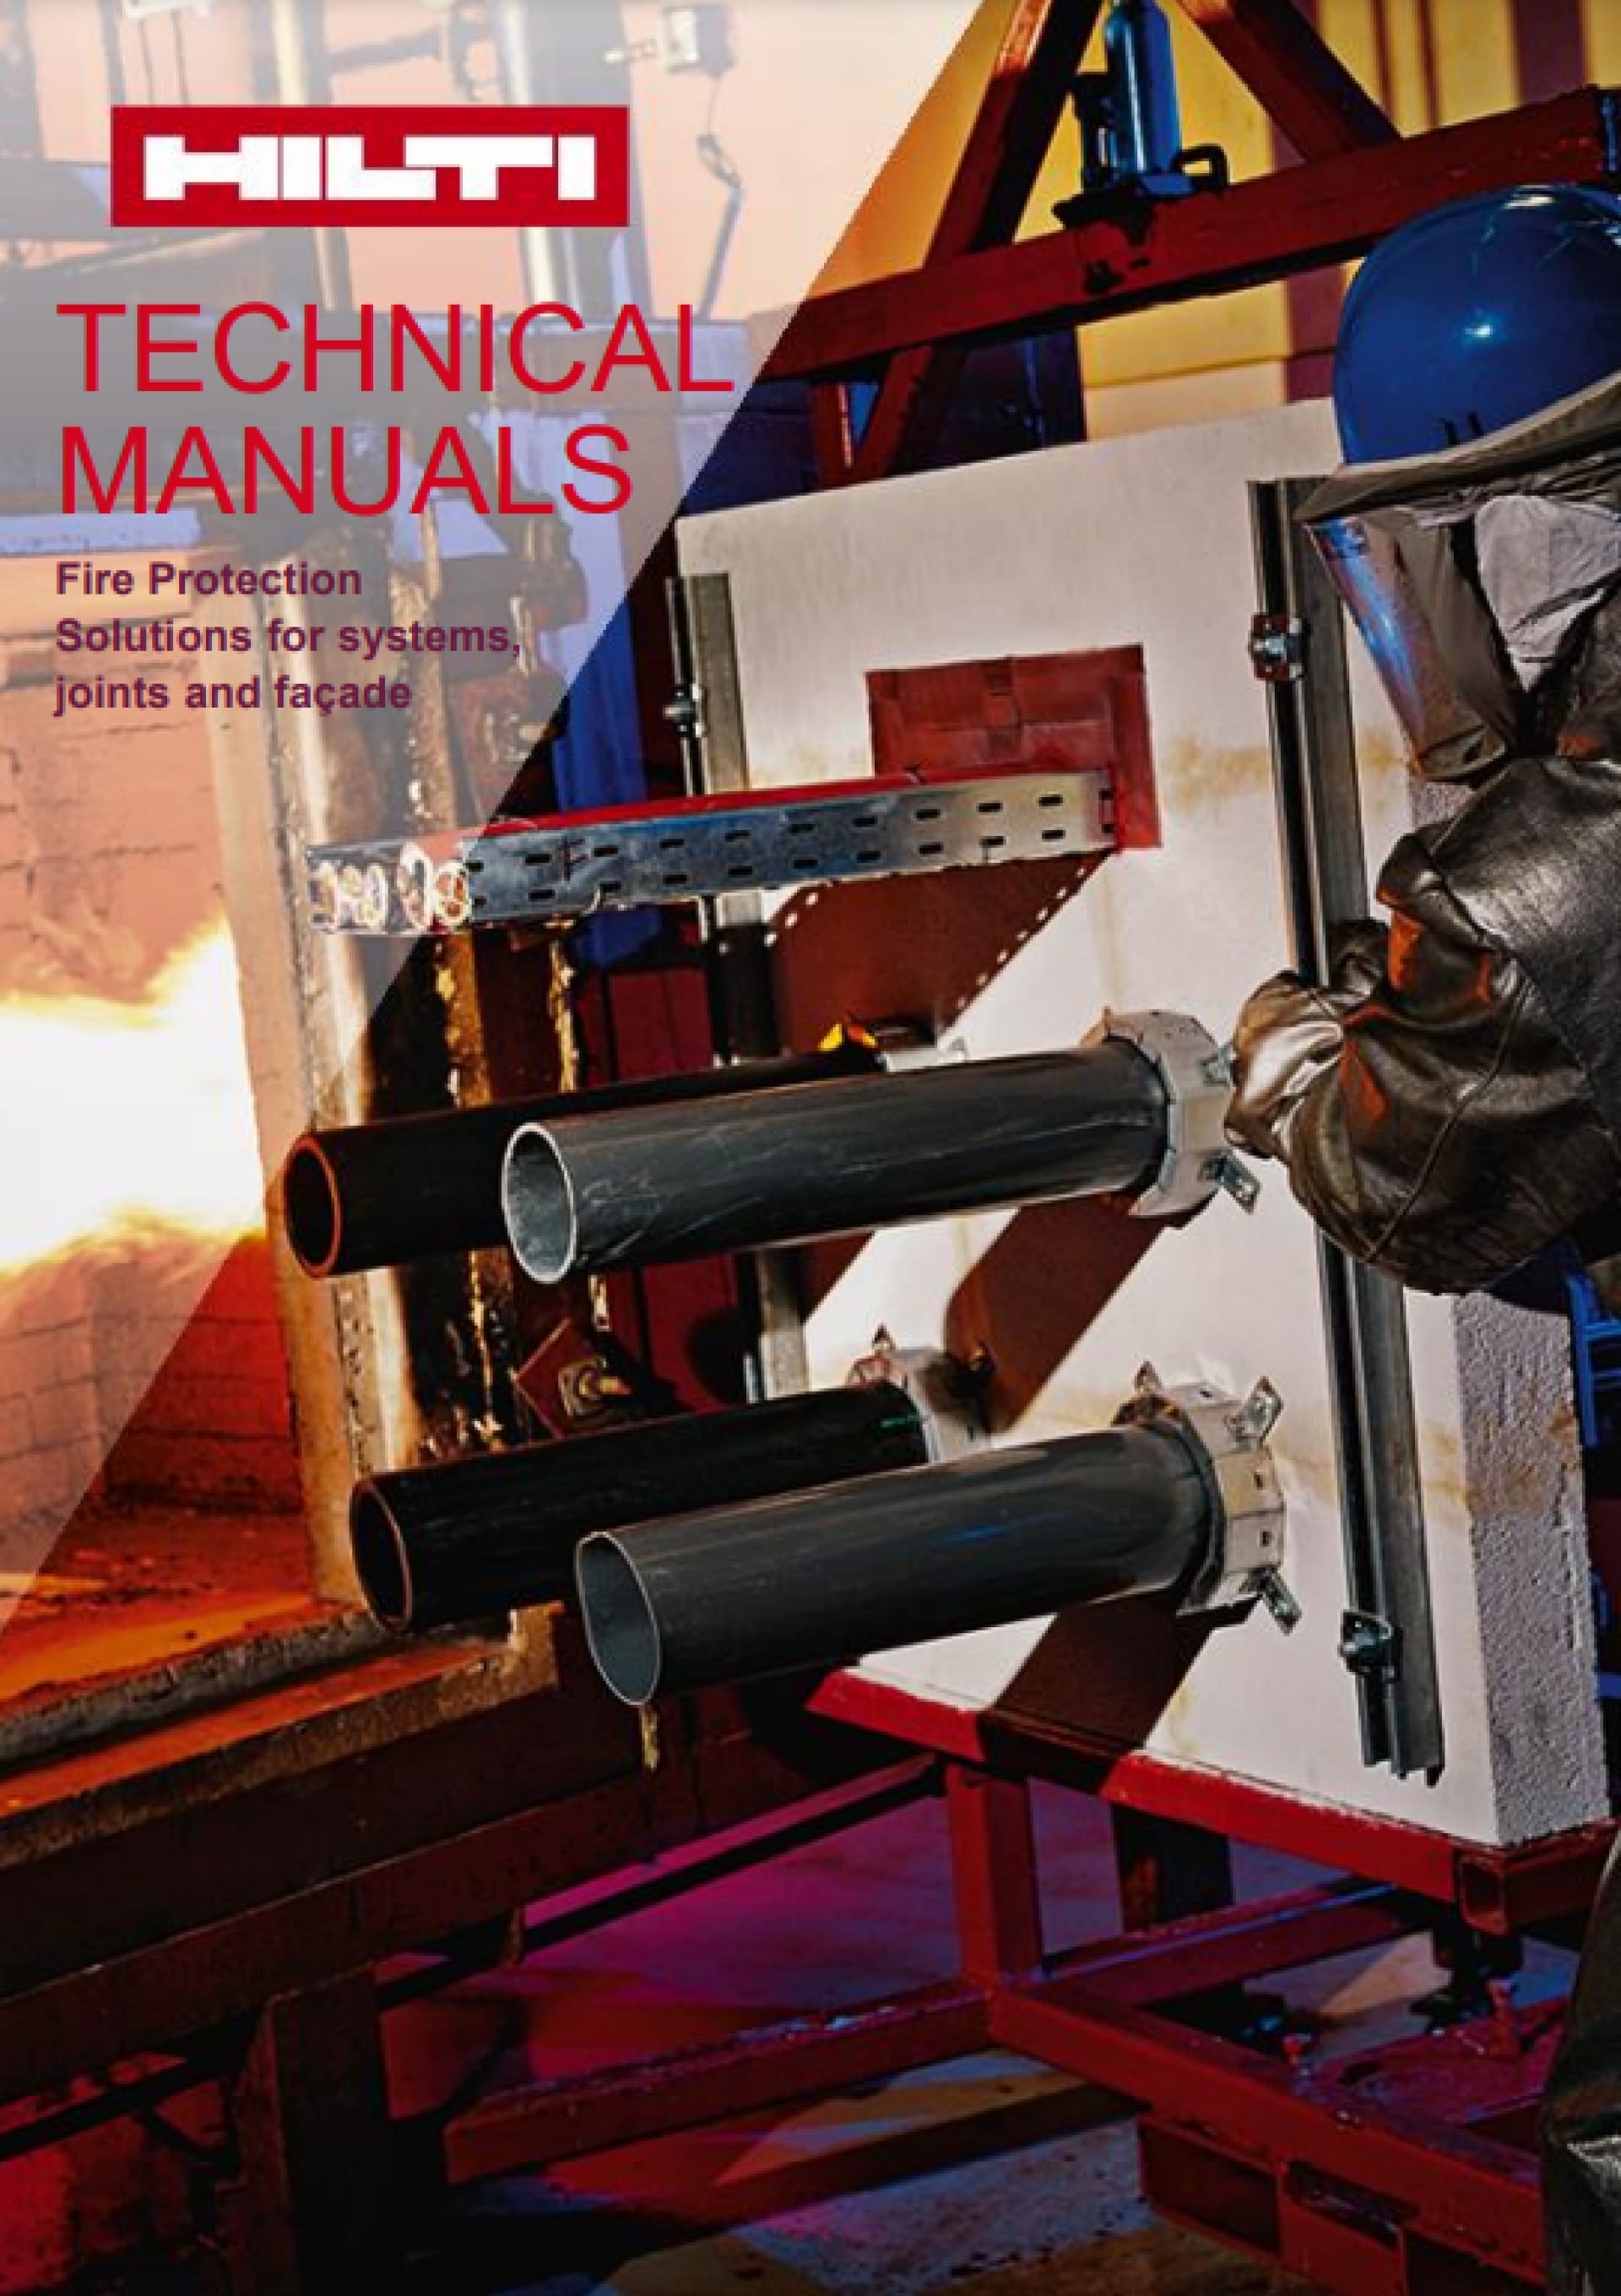 FIRE PROTECTION TECHNICAL MANUALS (pdf)